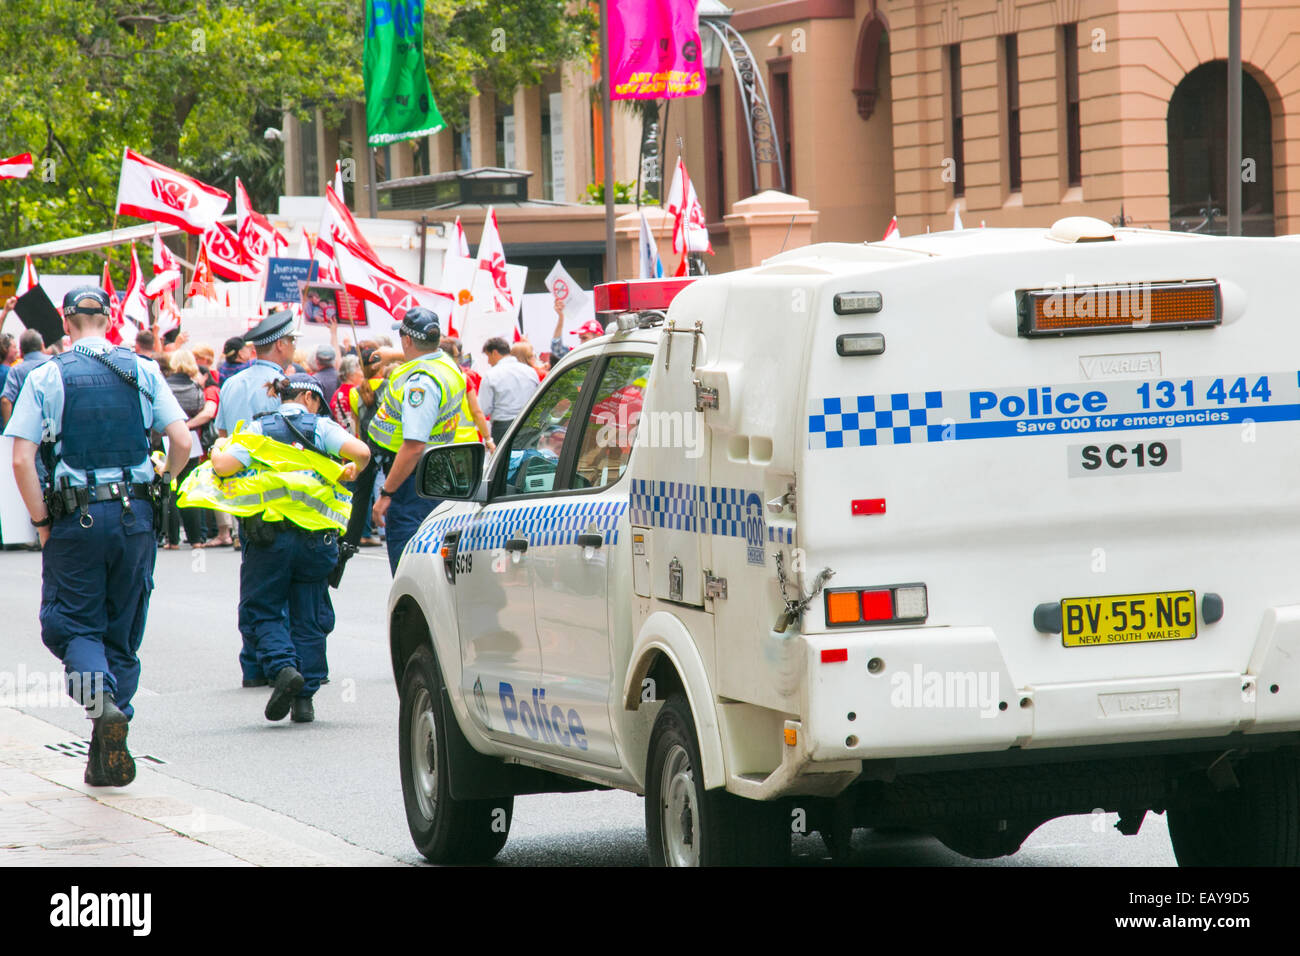 Australian new south wales police officers in macquarie street,Sydney,NSW, Australia attend for duty during a protest Stock Photo